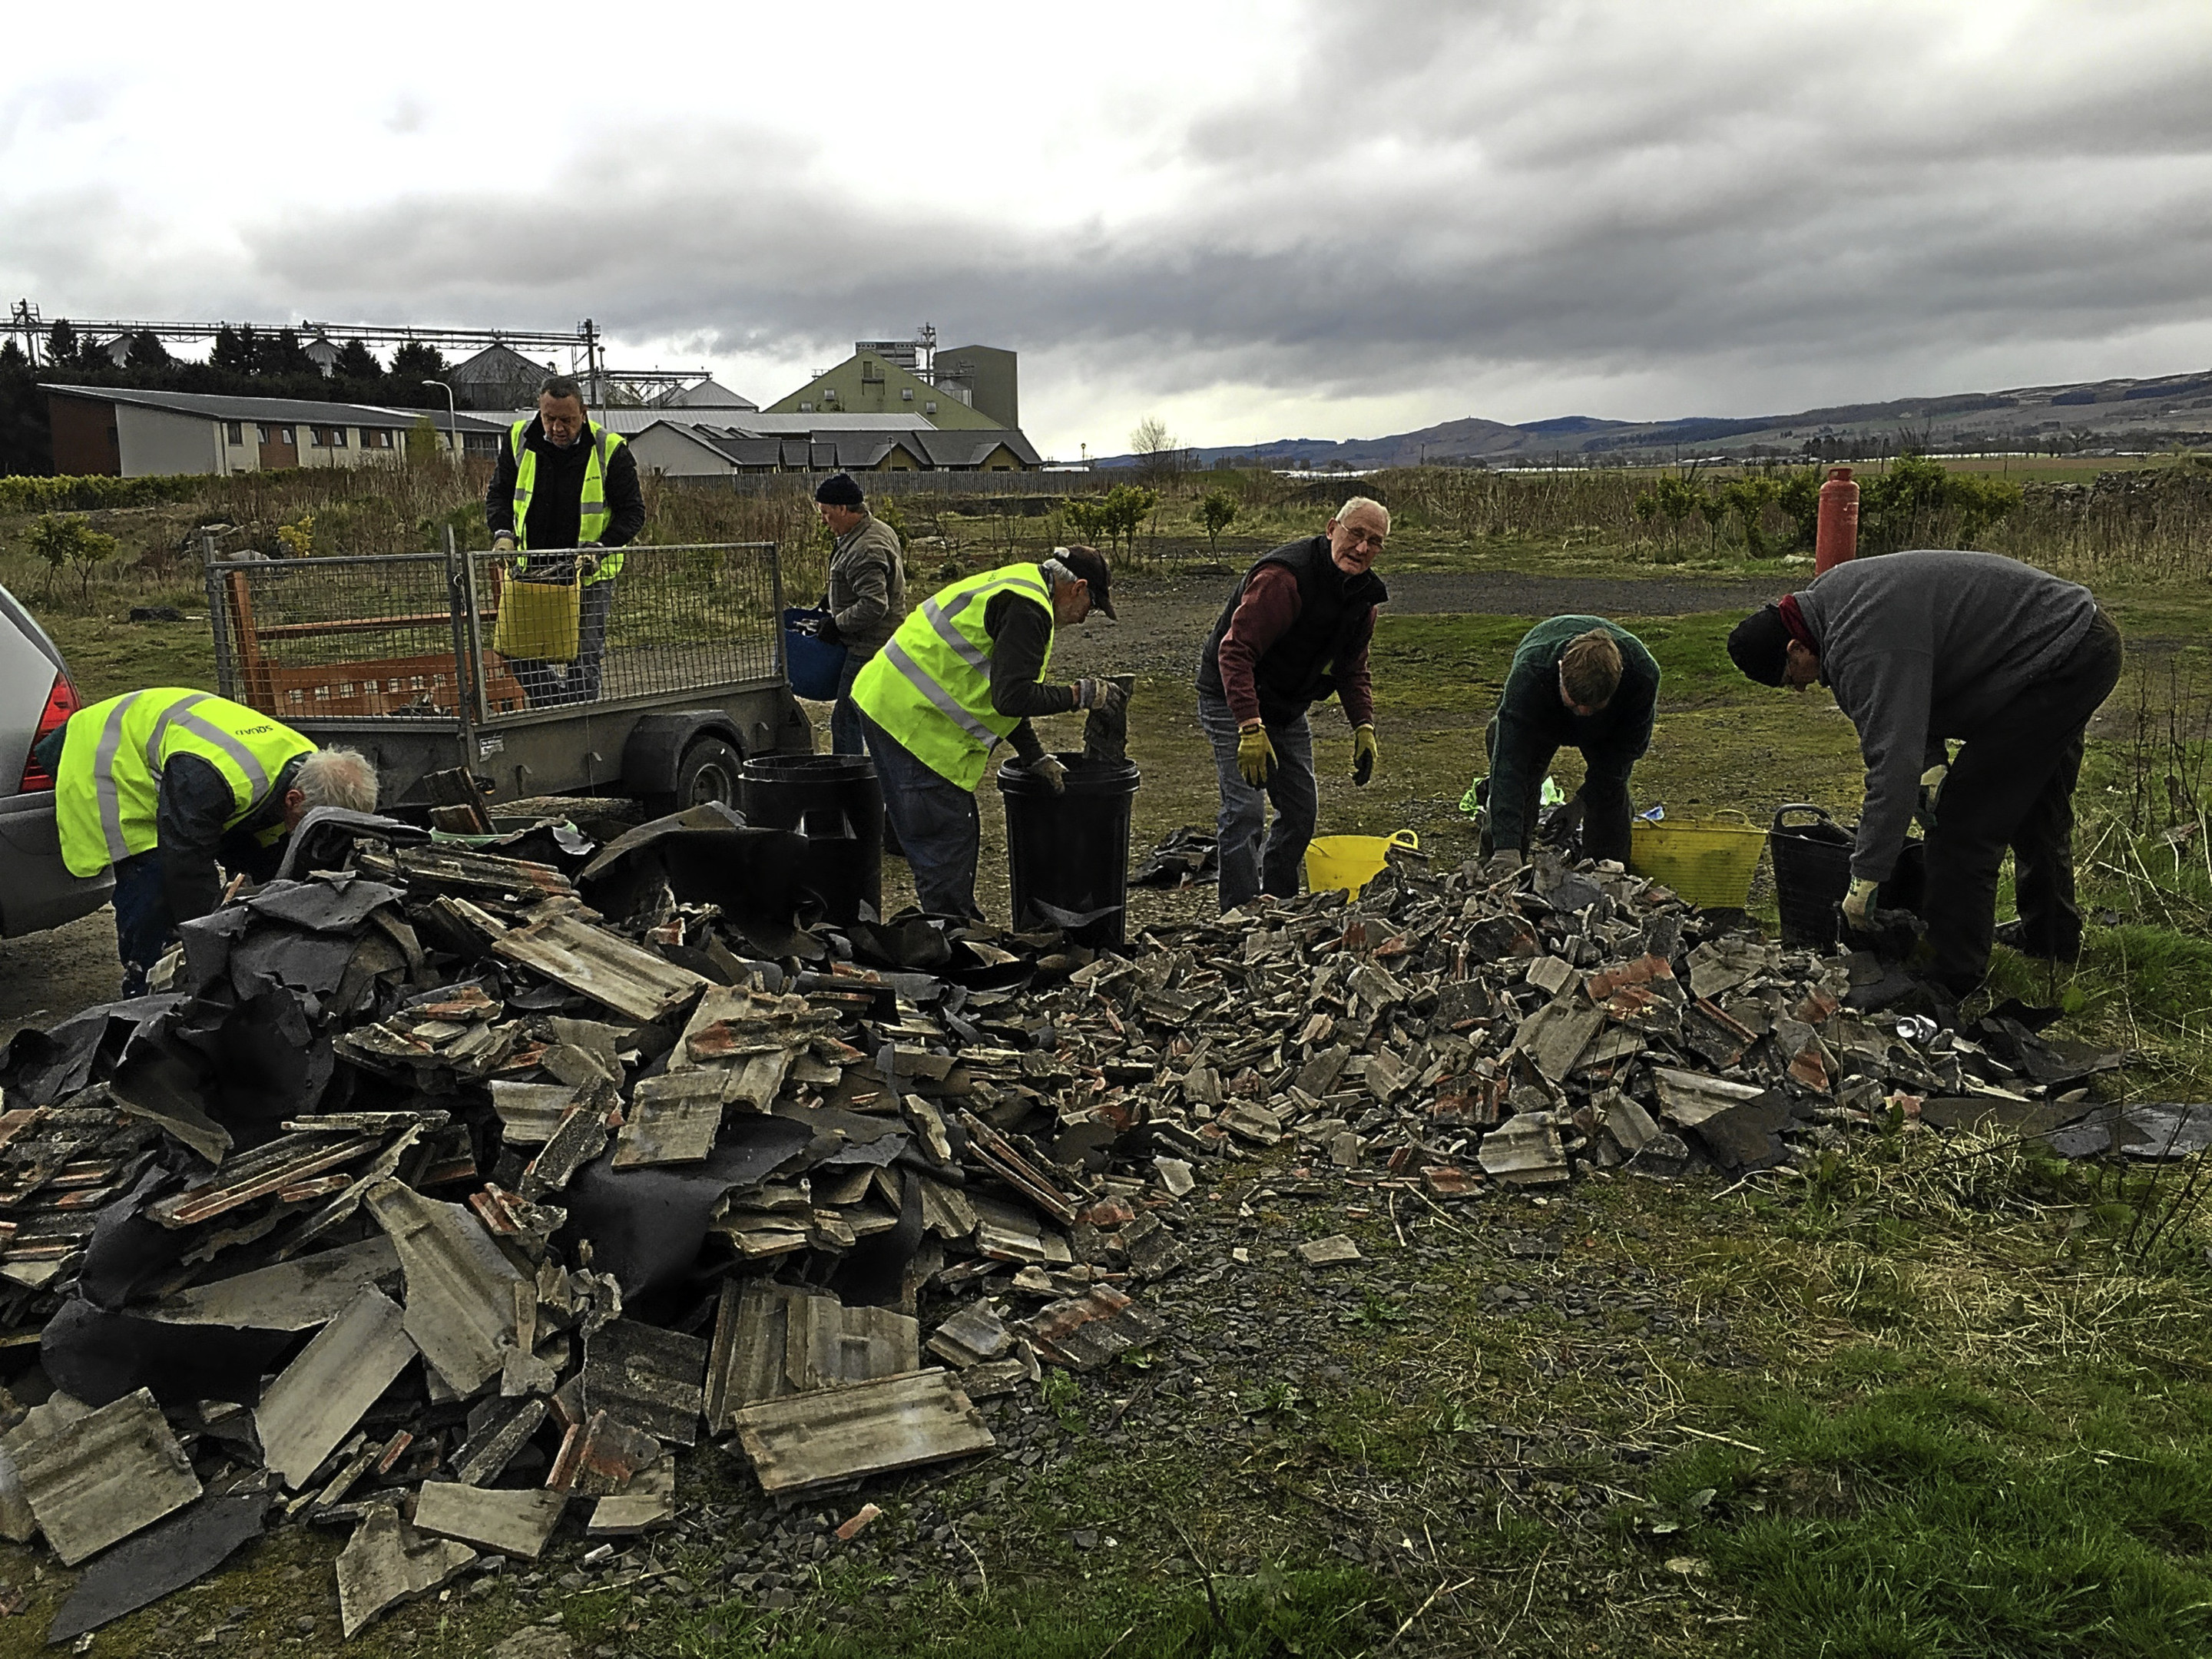 The MAD (Make A Difference) squad cleaning up the  fly tipping of roofing tiles at waste ground in Coupar Angus.